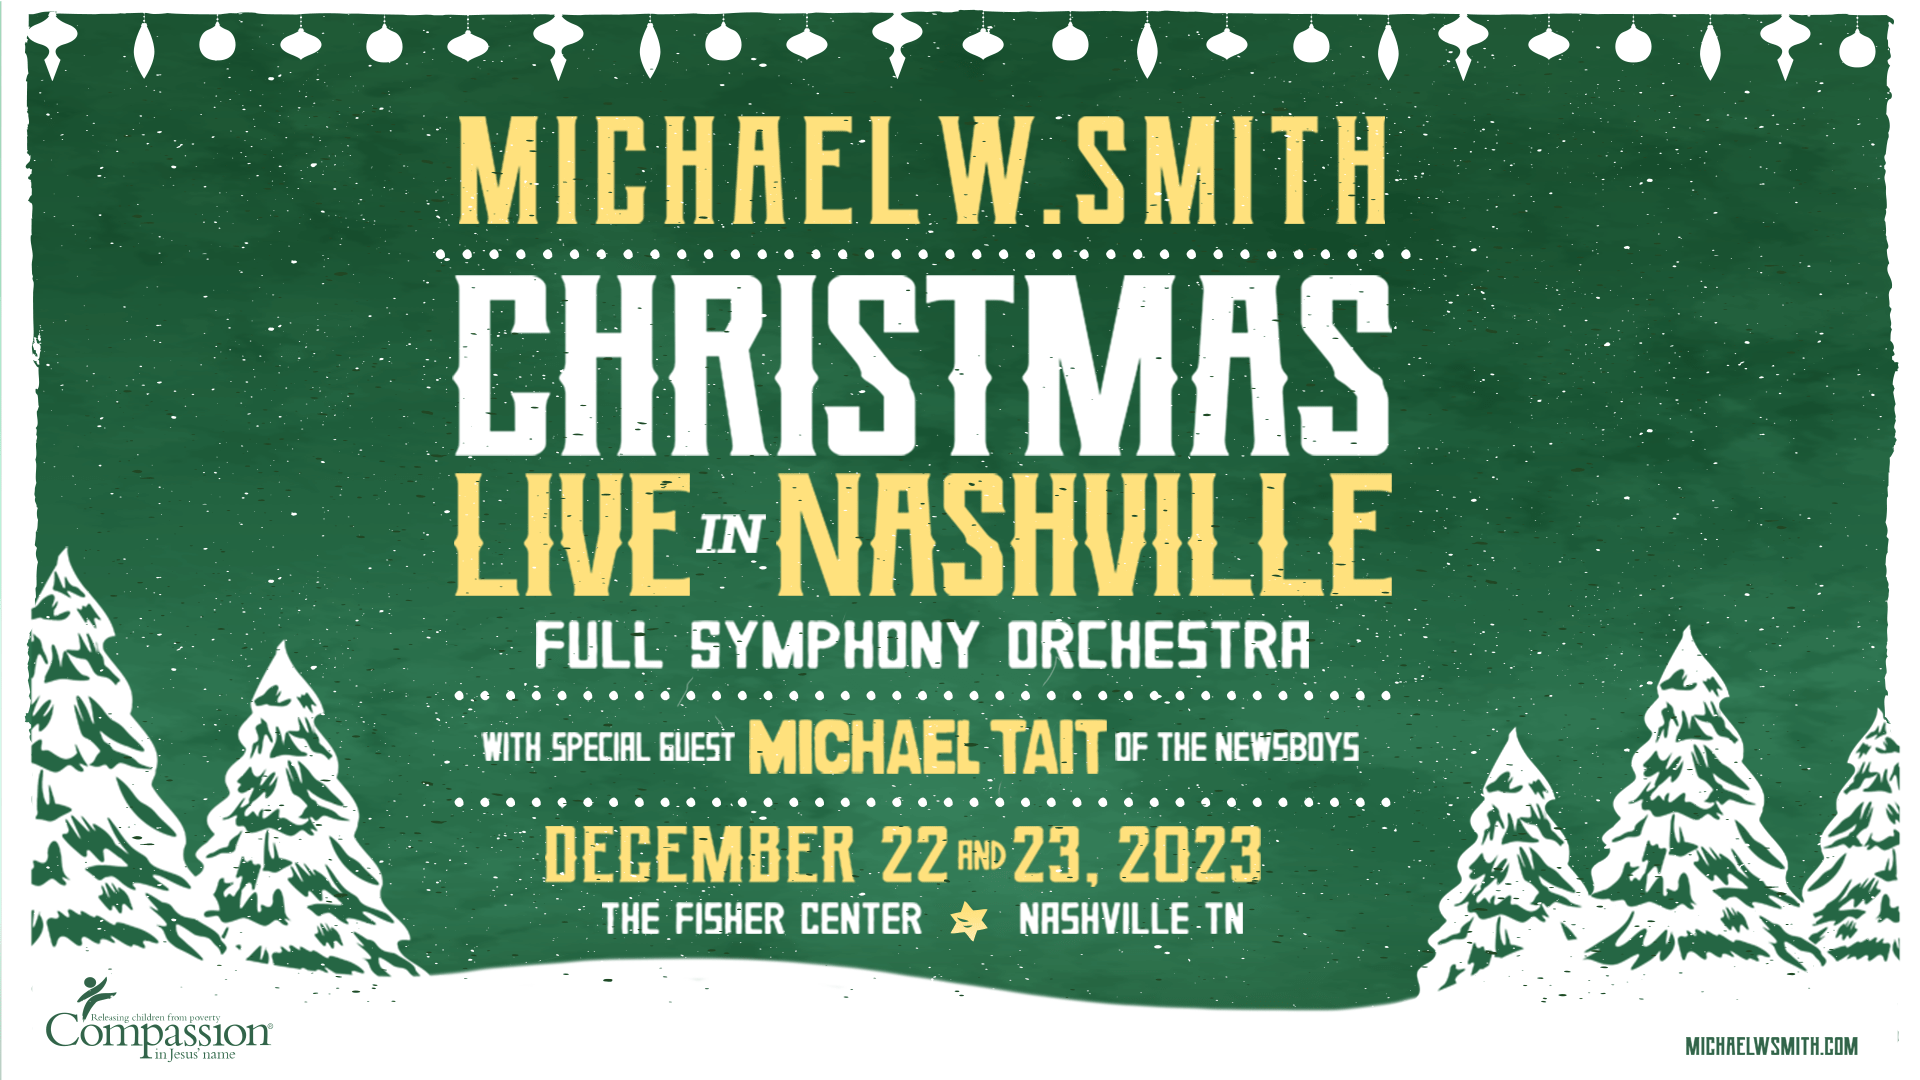 Michael W. Smith Christmas Live in Nashville